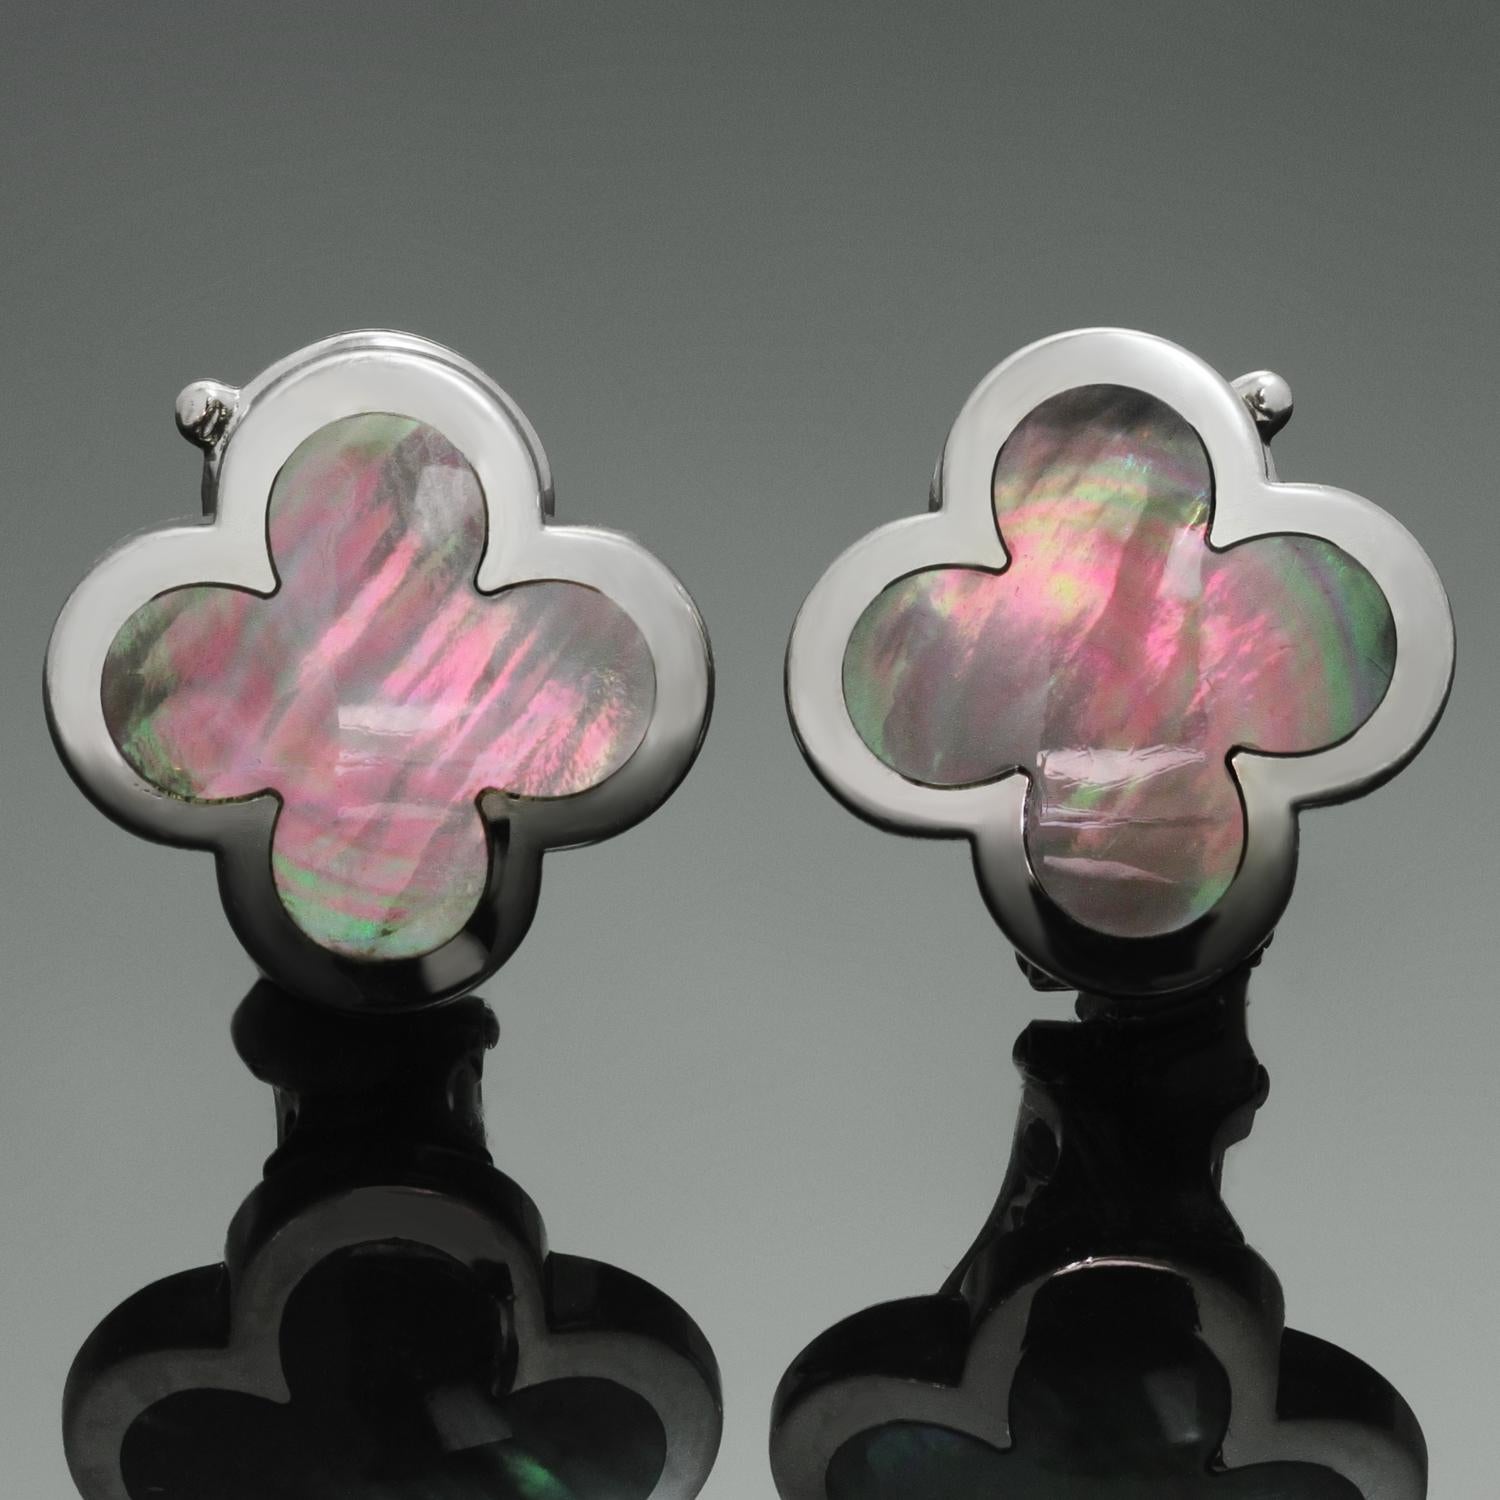 These gorgeous Van Cleef & Arpels clip-on earrings from the iconic Pure Alhambra collection feature a lucky clover design crafted in 18k white gold and inalid with gray mother-of-pearl. Made in France circa 2000s. Made in France circa 2010s.